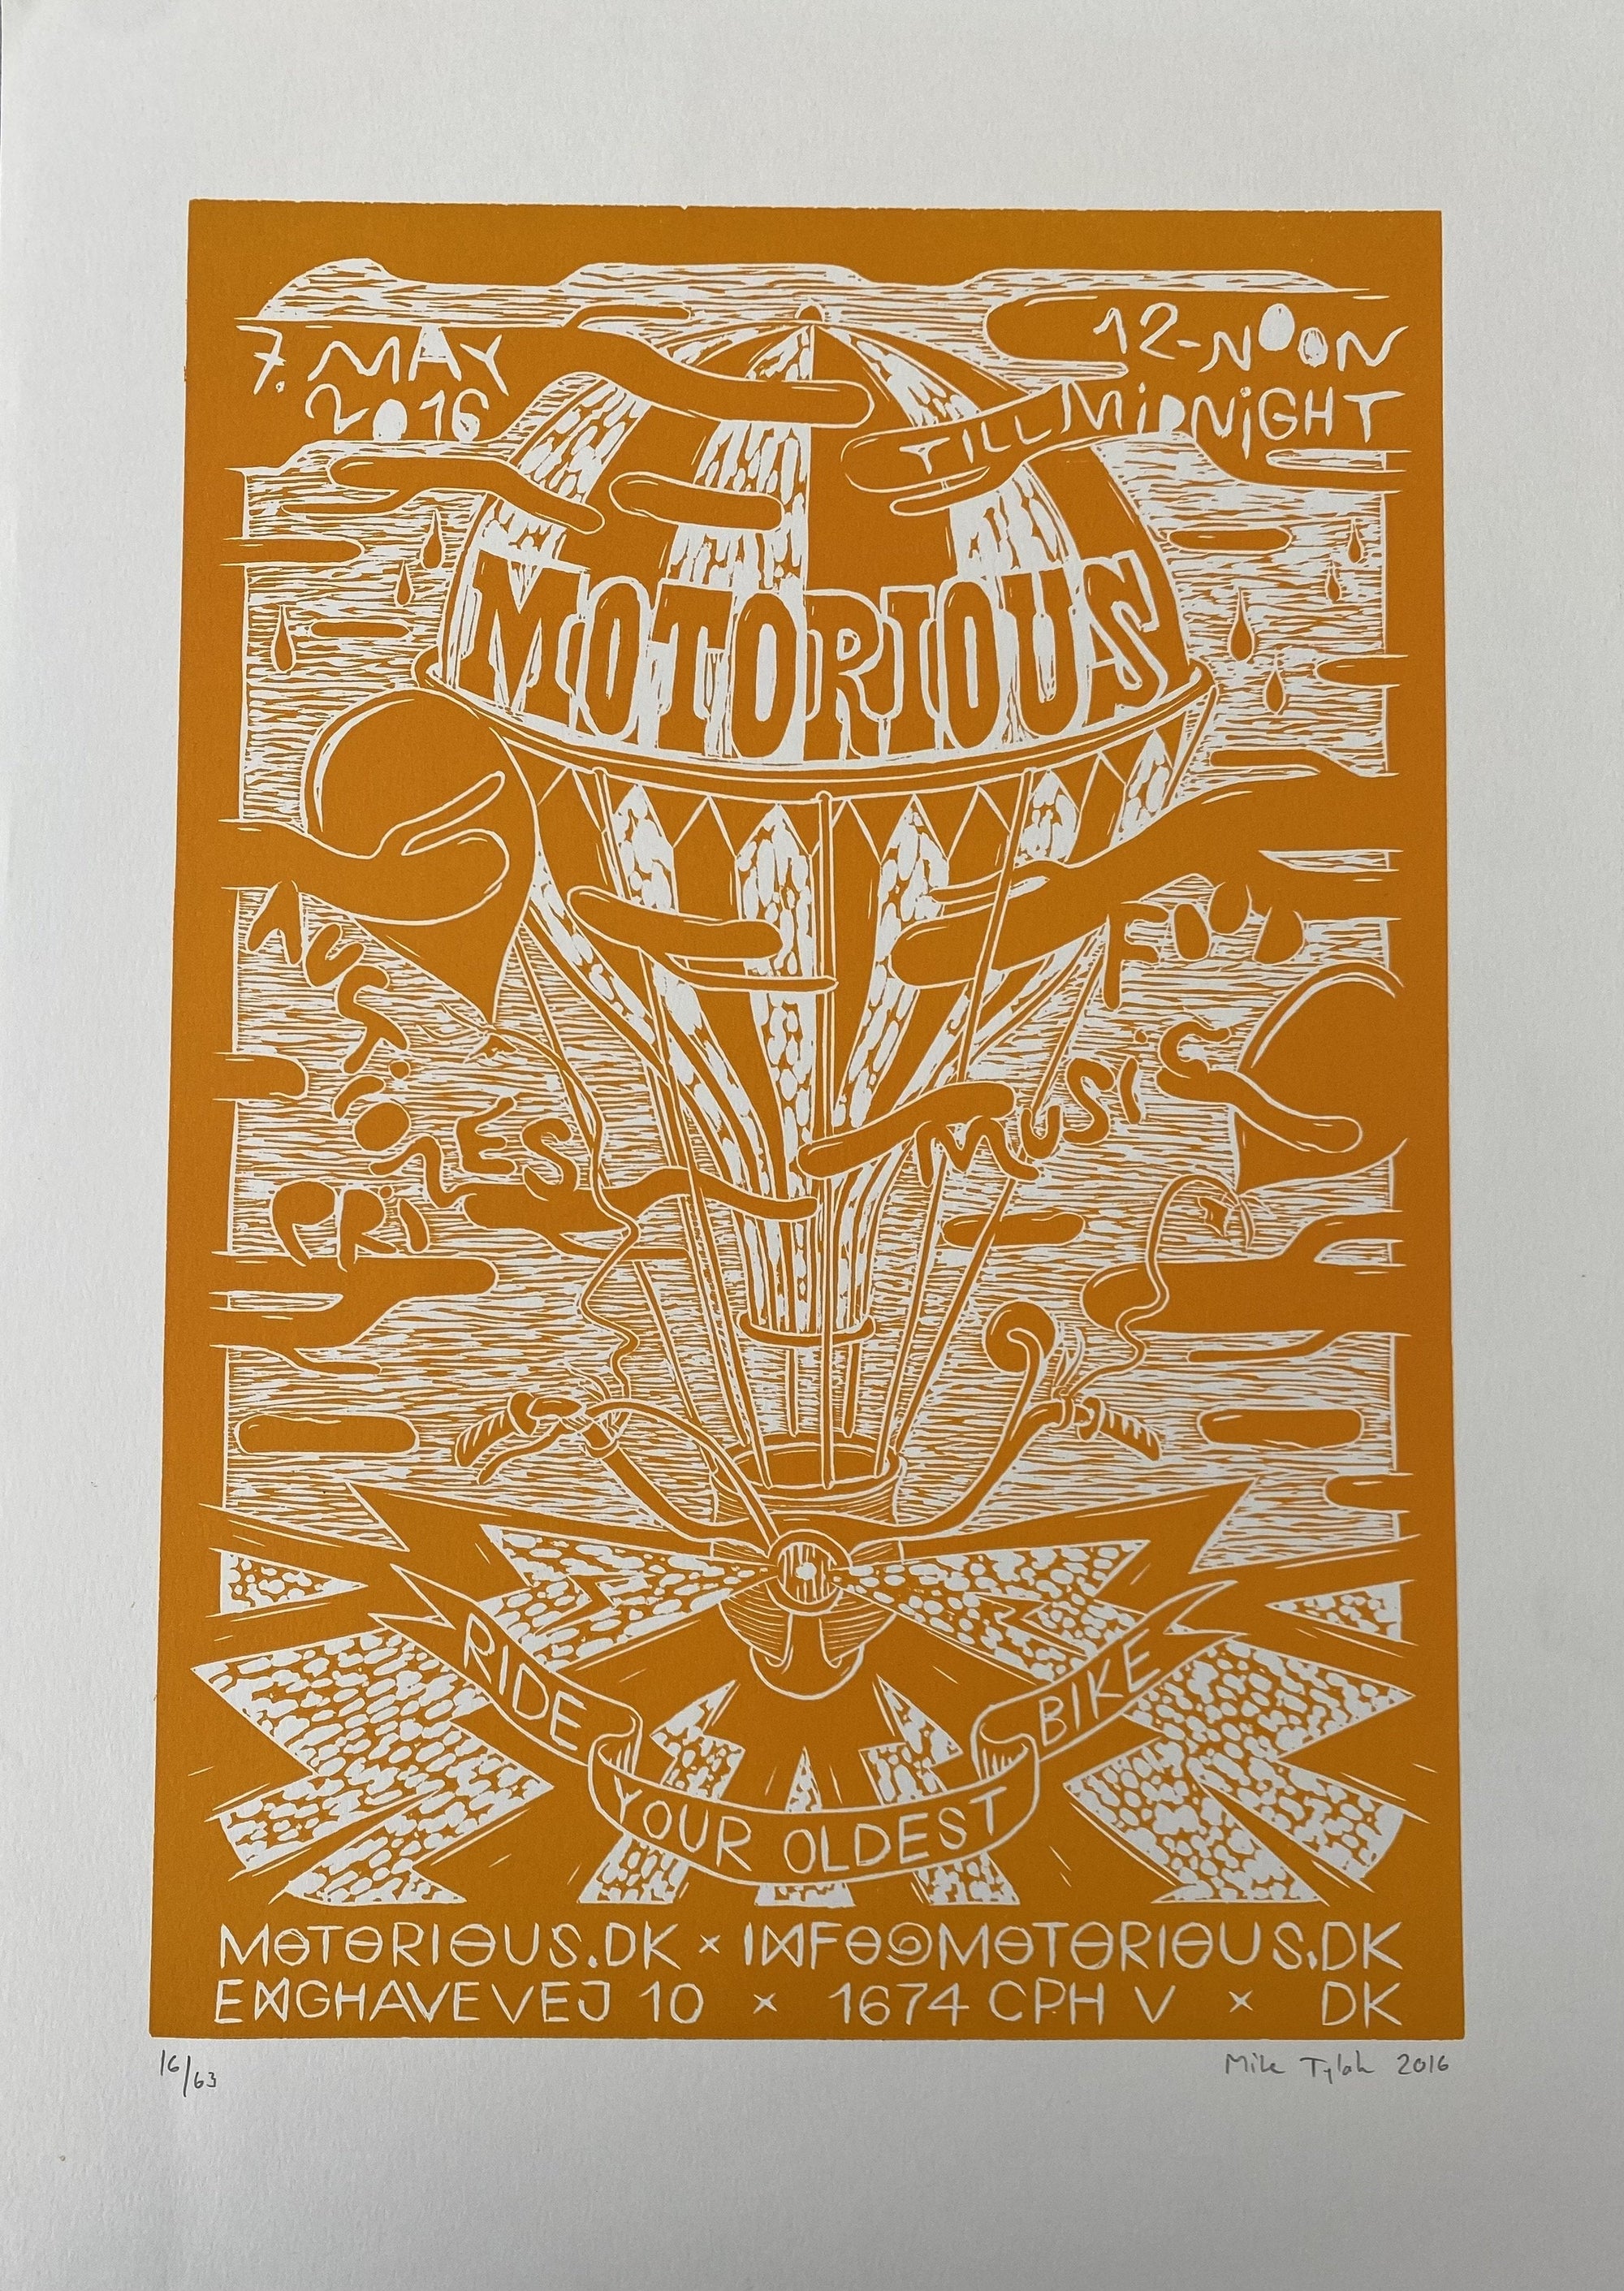 2016 Motorious lino-cut by Mike Tylak, A3 oversize, Yellow on White-Linoleumstryk og Plakater-Motorious Copenhagen-Motorious Copenhagen